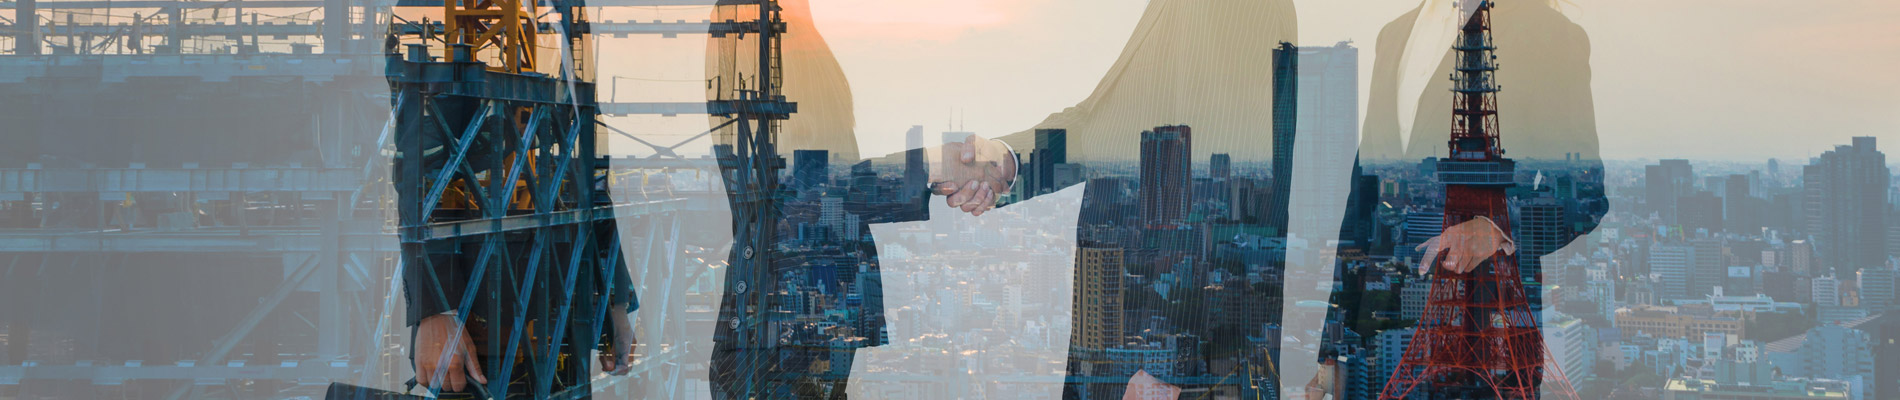 business people shaking hands superimposed over high rise construction